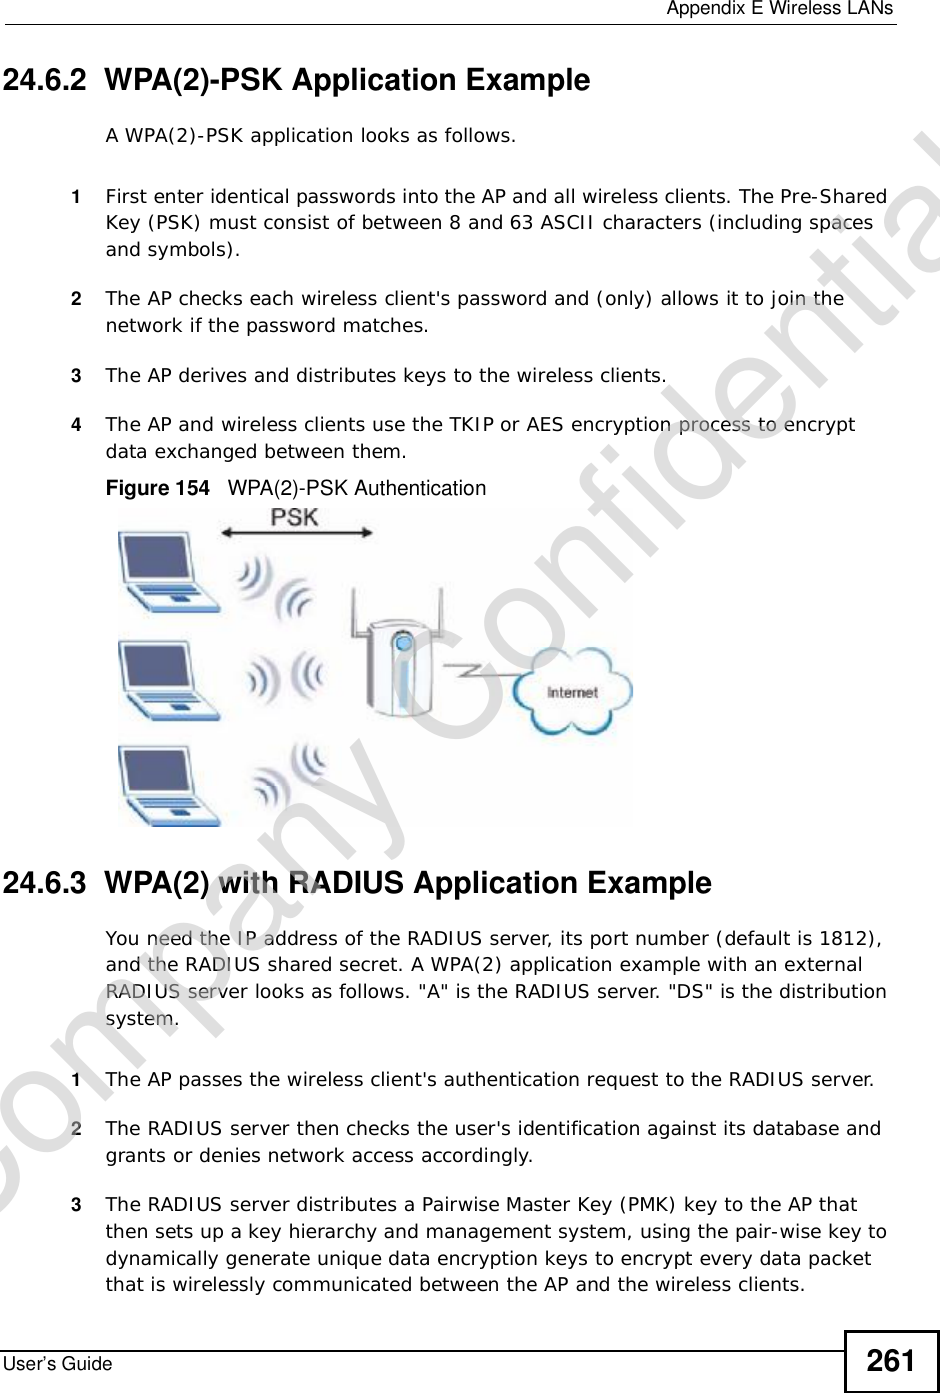  Appendix EWireless LANsUser’s Guide 26124.6.2  WPA(2)-PSK Application ExampleA WPA(2)-PSK application looks as follows.1First enter identical passwords into the AP and all wireless clients. The Pre-Shared Key (PSK) must consist of between 8 and 63 ASCII characters (including spaces and symbols).2The AP checks each wireless client&apos;s password and (only) allows it to join the network if the password matches.3The AP derives and distributes keys to the wireless clients.4The AP and wireless clients use the TKIP or AES encryption process to encrypt data exchanged between them.Figure 154   WPA(2)-PSK Authentication24.6.3  WPA(2) with RADIUS Application ExampleYou need the IP address of the RADIUS server, its port number (default is 1812), and the RADIUS shared secret. A WPA(2) application example with an external RADIUS server looks as follows. &quot;A&quot; is the RADIUS server. &quot;DS&quot; is the distribution system.1The AP passes the wireless client&apos;s authentication request to the RADIUS server.2The RADIUS server then checks the user&apos;s identification against its database and grants or denies network access accordingly.3The RADIUS server distributes a Pairwise Master Key (PMK) key to the AP that then sets up a key hierarchy and management system, using the pair-wise key to dynamically generate unique data encryption keys to encrypt every data packet that is wirelessly communicated between the AP and the wireless clients. Company Confidential